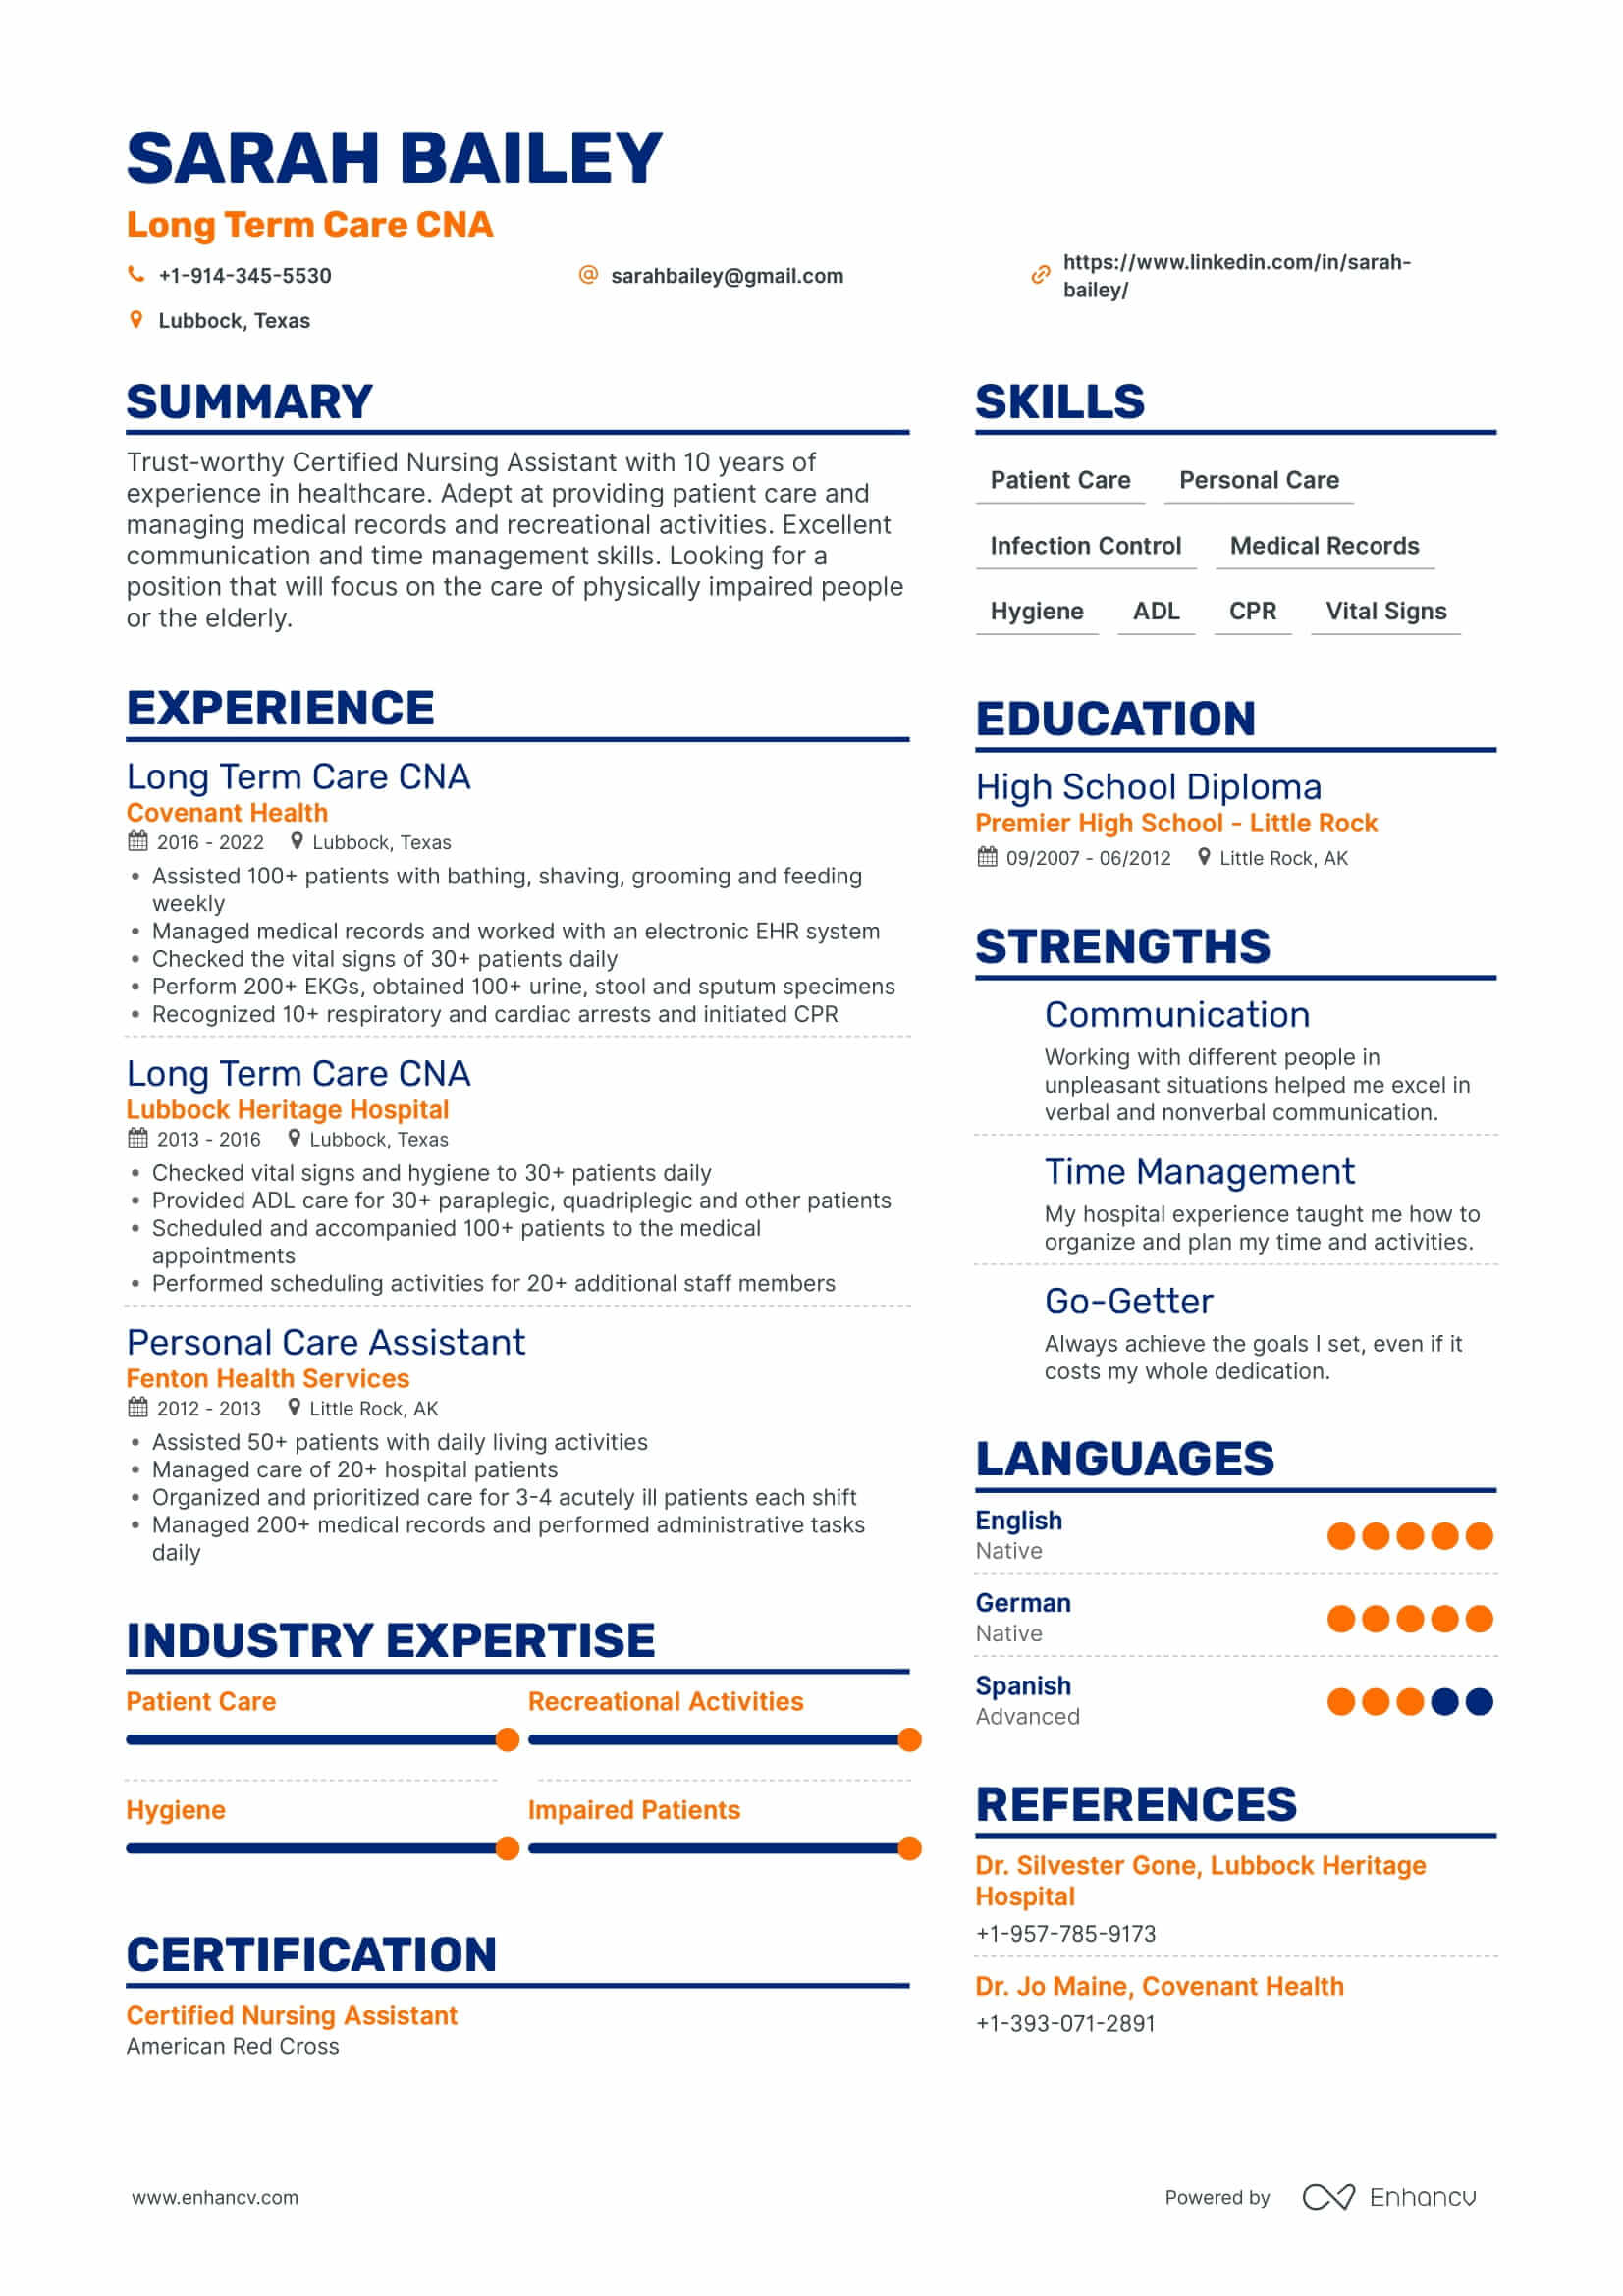 Long Term Care Certified Nursing Assistant Resume Example